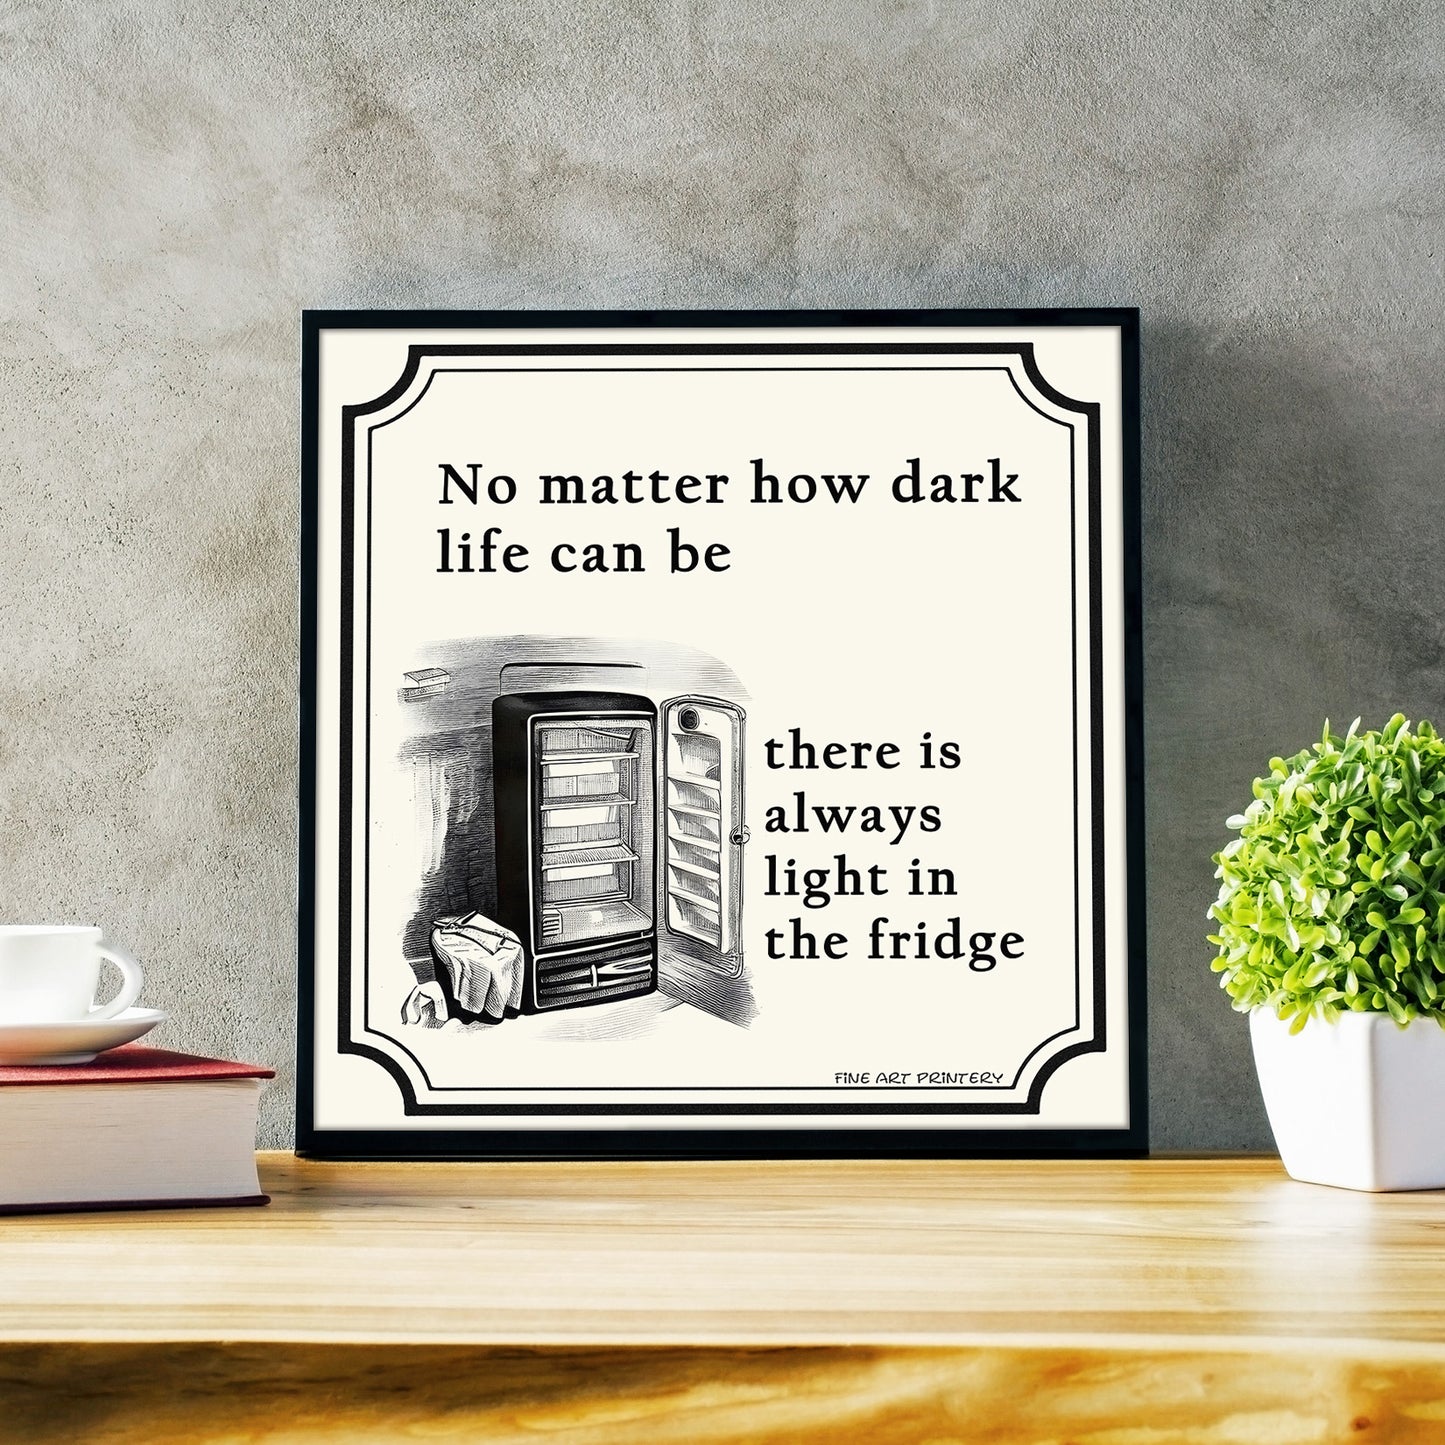 No matter how dark life can be, there is always light in the fridge